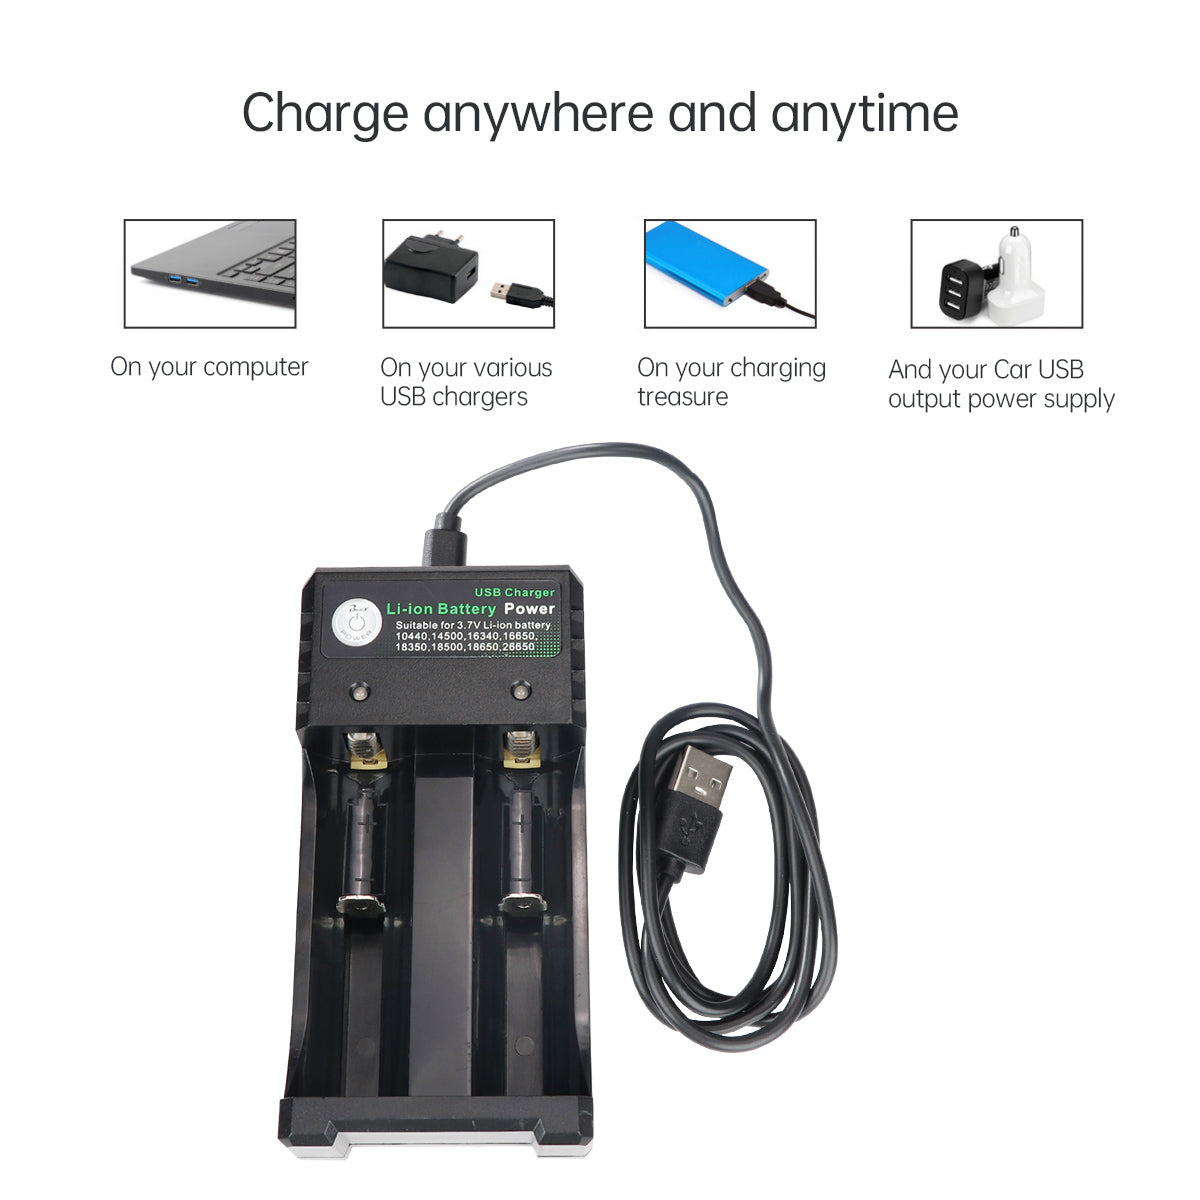 18650 LI-Ion Battery Charger and Dual USB 5V 2A Step Up Power